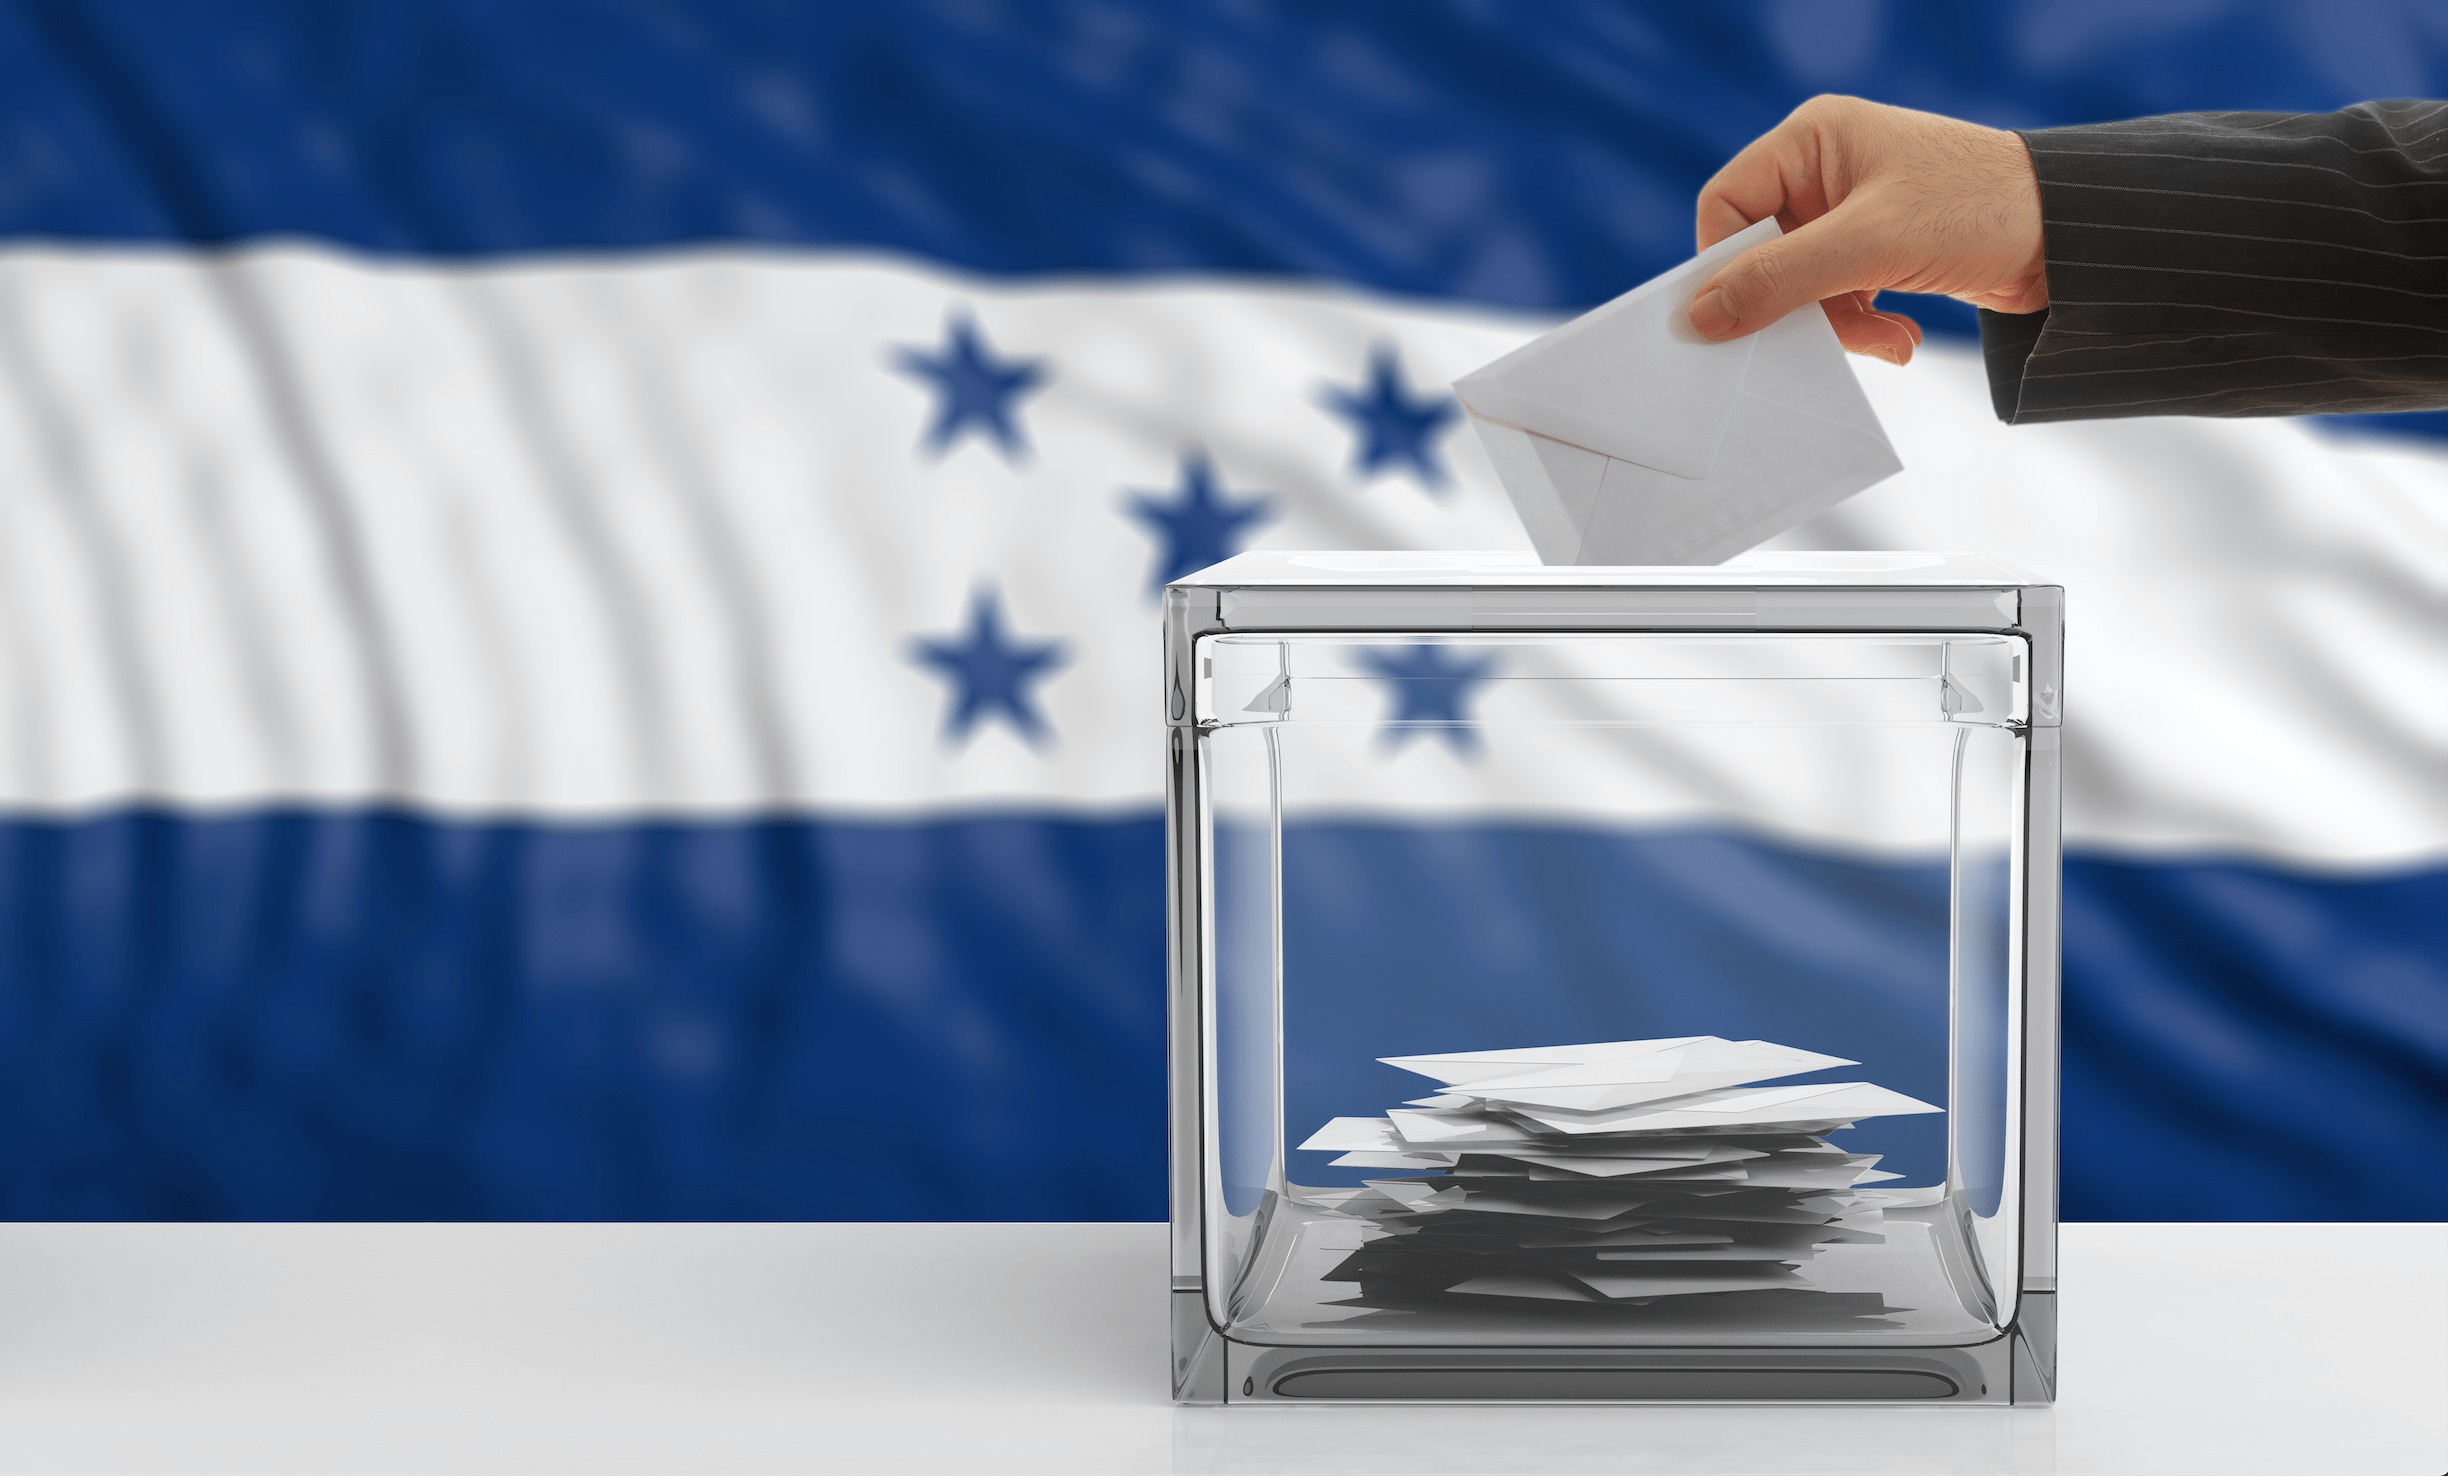 Hondurans uncertain over alleged fraud ahead of elections